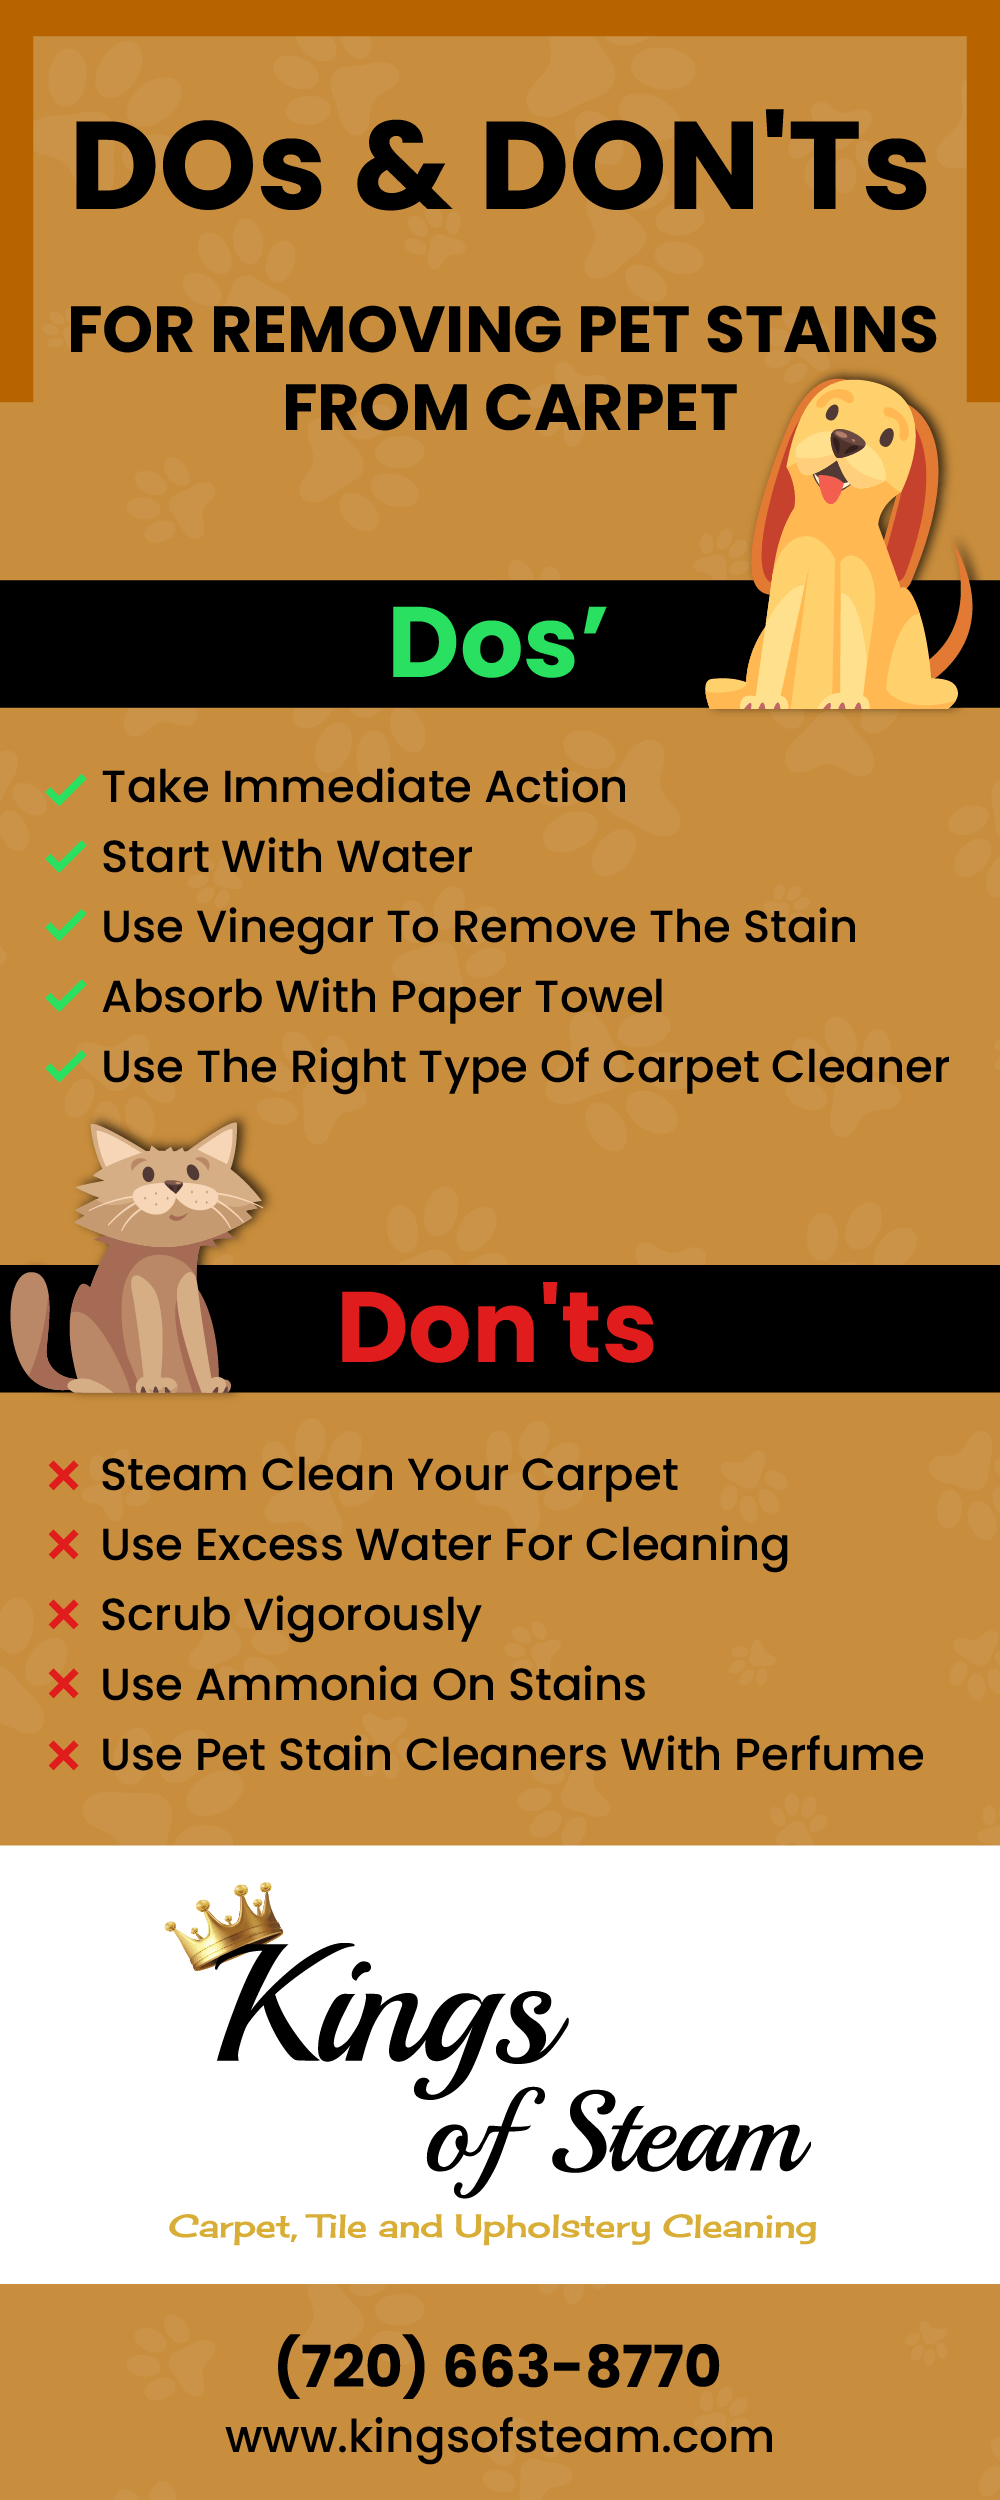 DOs And DON'Ts For Removing Pet Stains From Carpet